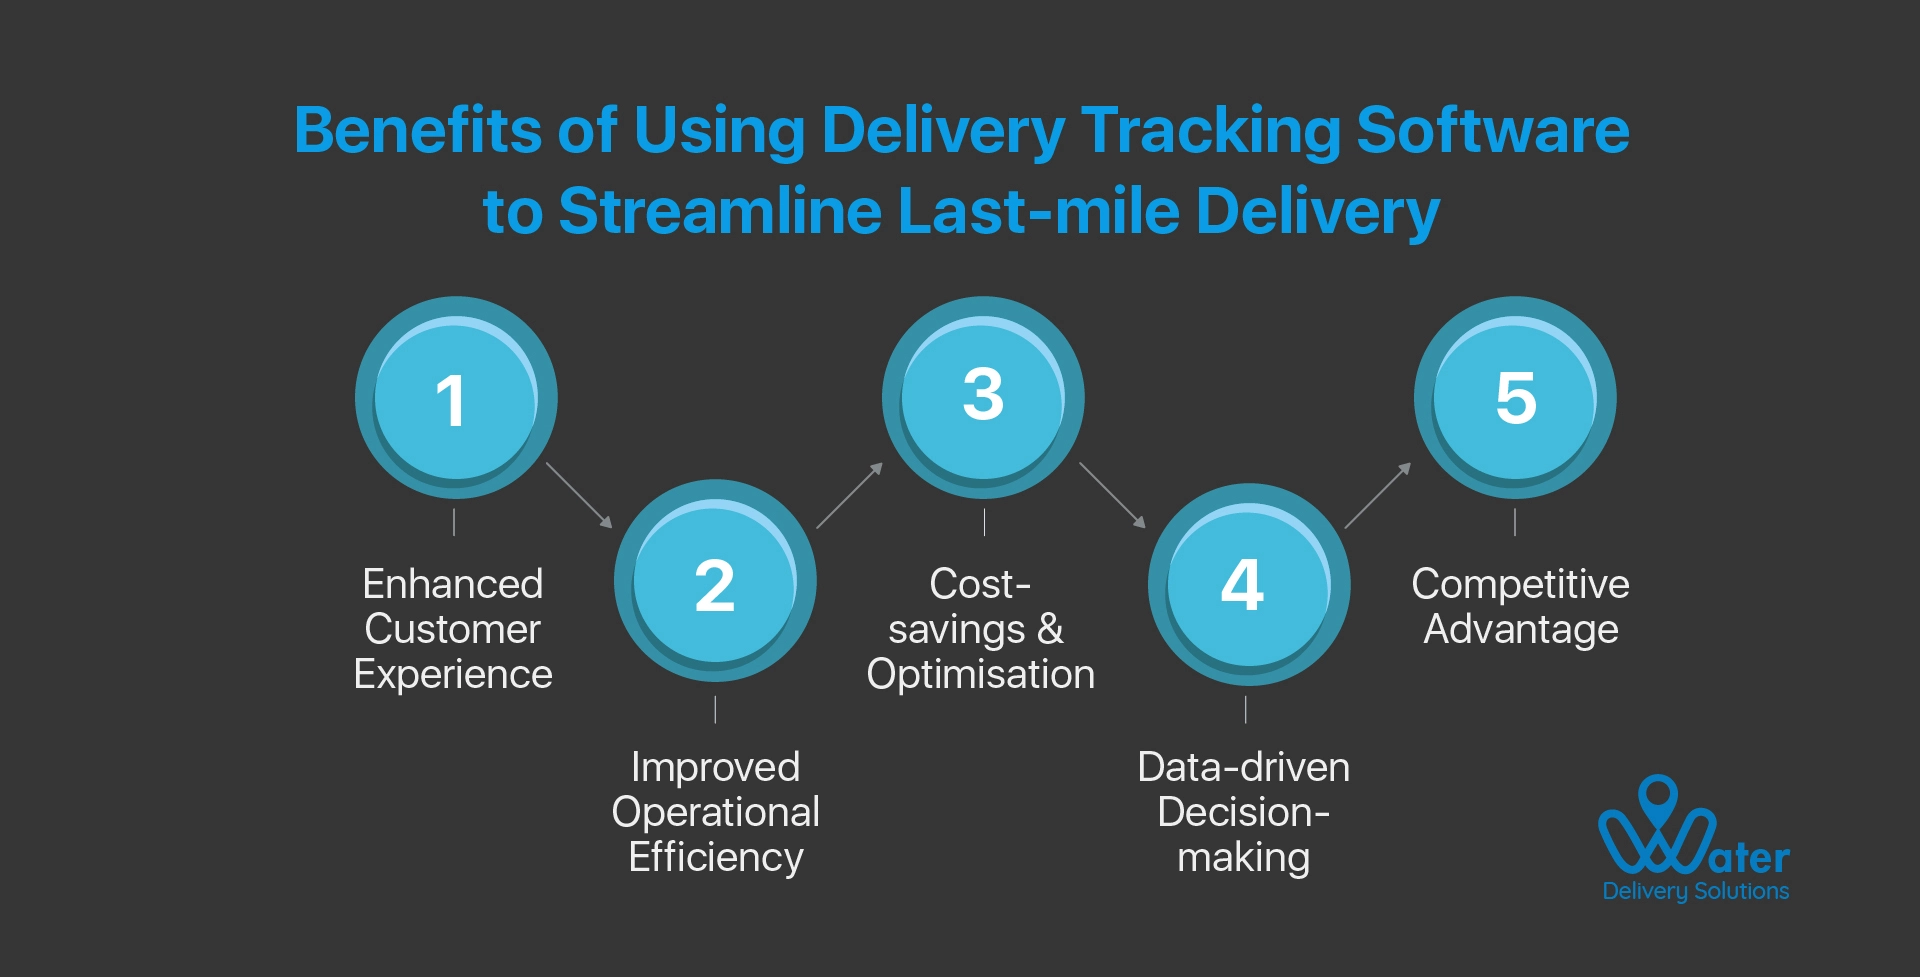 ravi garg, wds, benefits, delivery tracking software, last-mile delivery, customer experience, operational efficiency, cost-saving, optimisation, decision making, competitive advantage